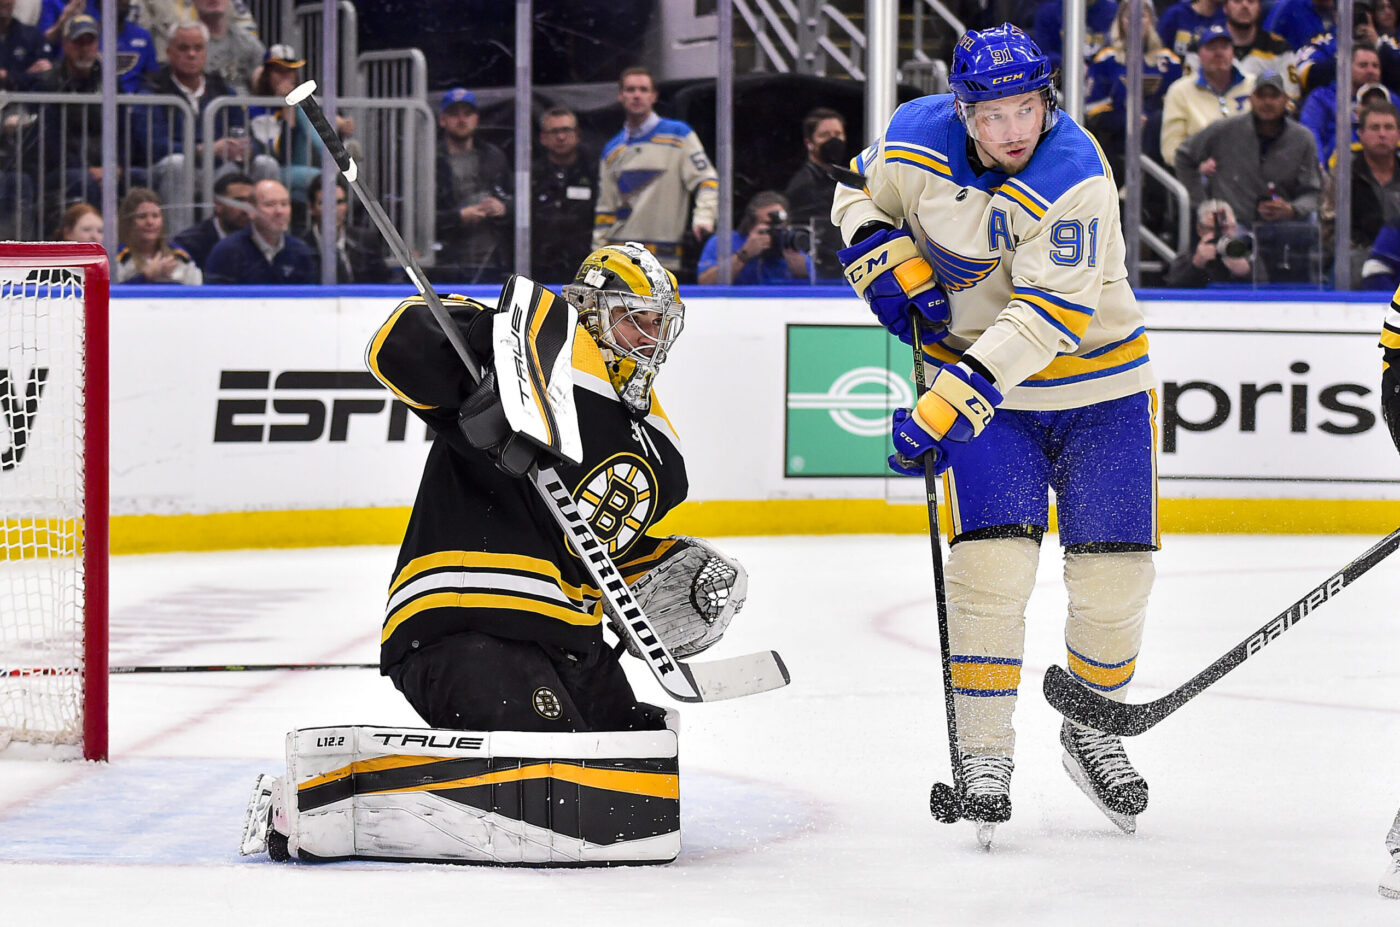 Apr 19, 2022; St. Louis, Missouri, USA; Boston Bruins goaltender Jeremy Swayman (1) defends the net against St. Louis Blues right wing Vladimir Tarasenko (91) during the second period at Enterprise Center. Mandatory Credit: Jeff Curry/USA TODAY Sports